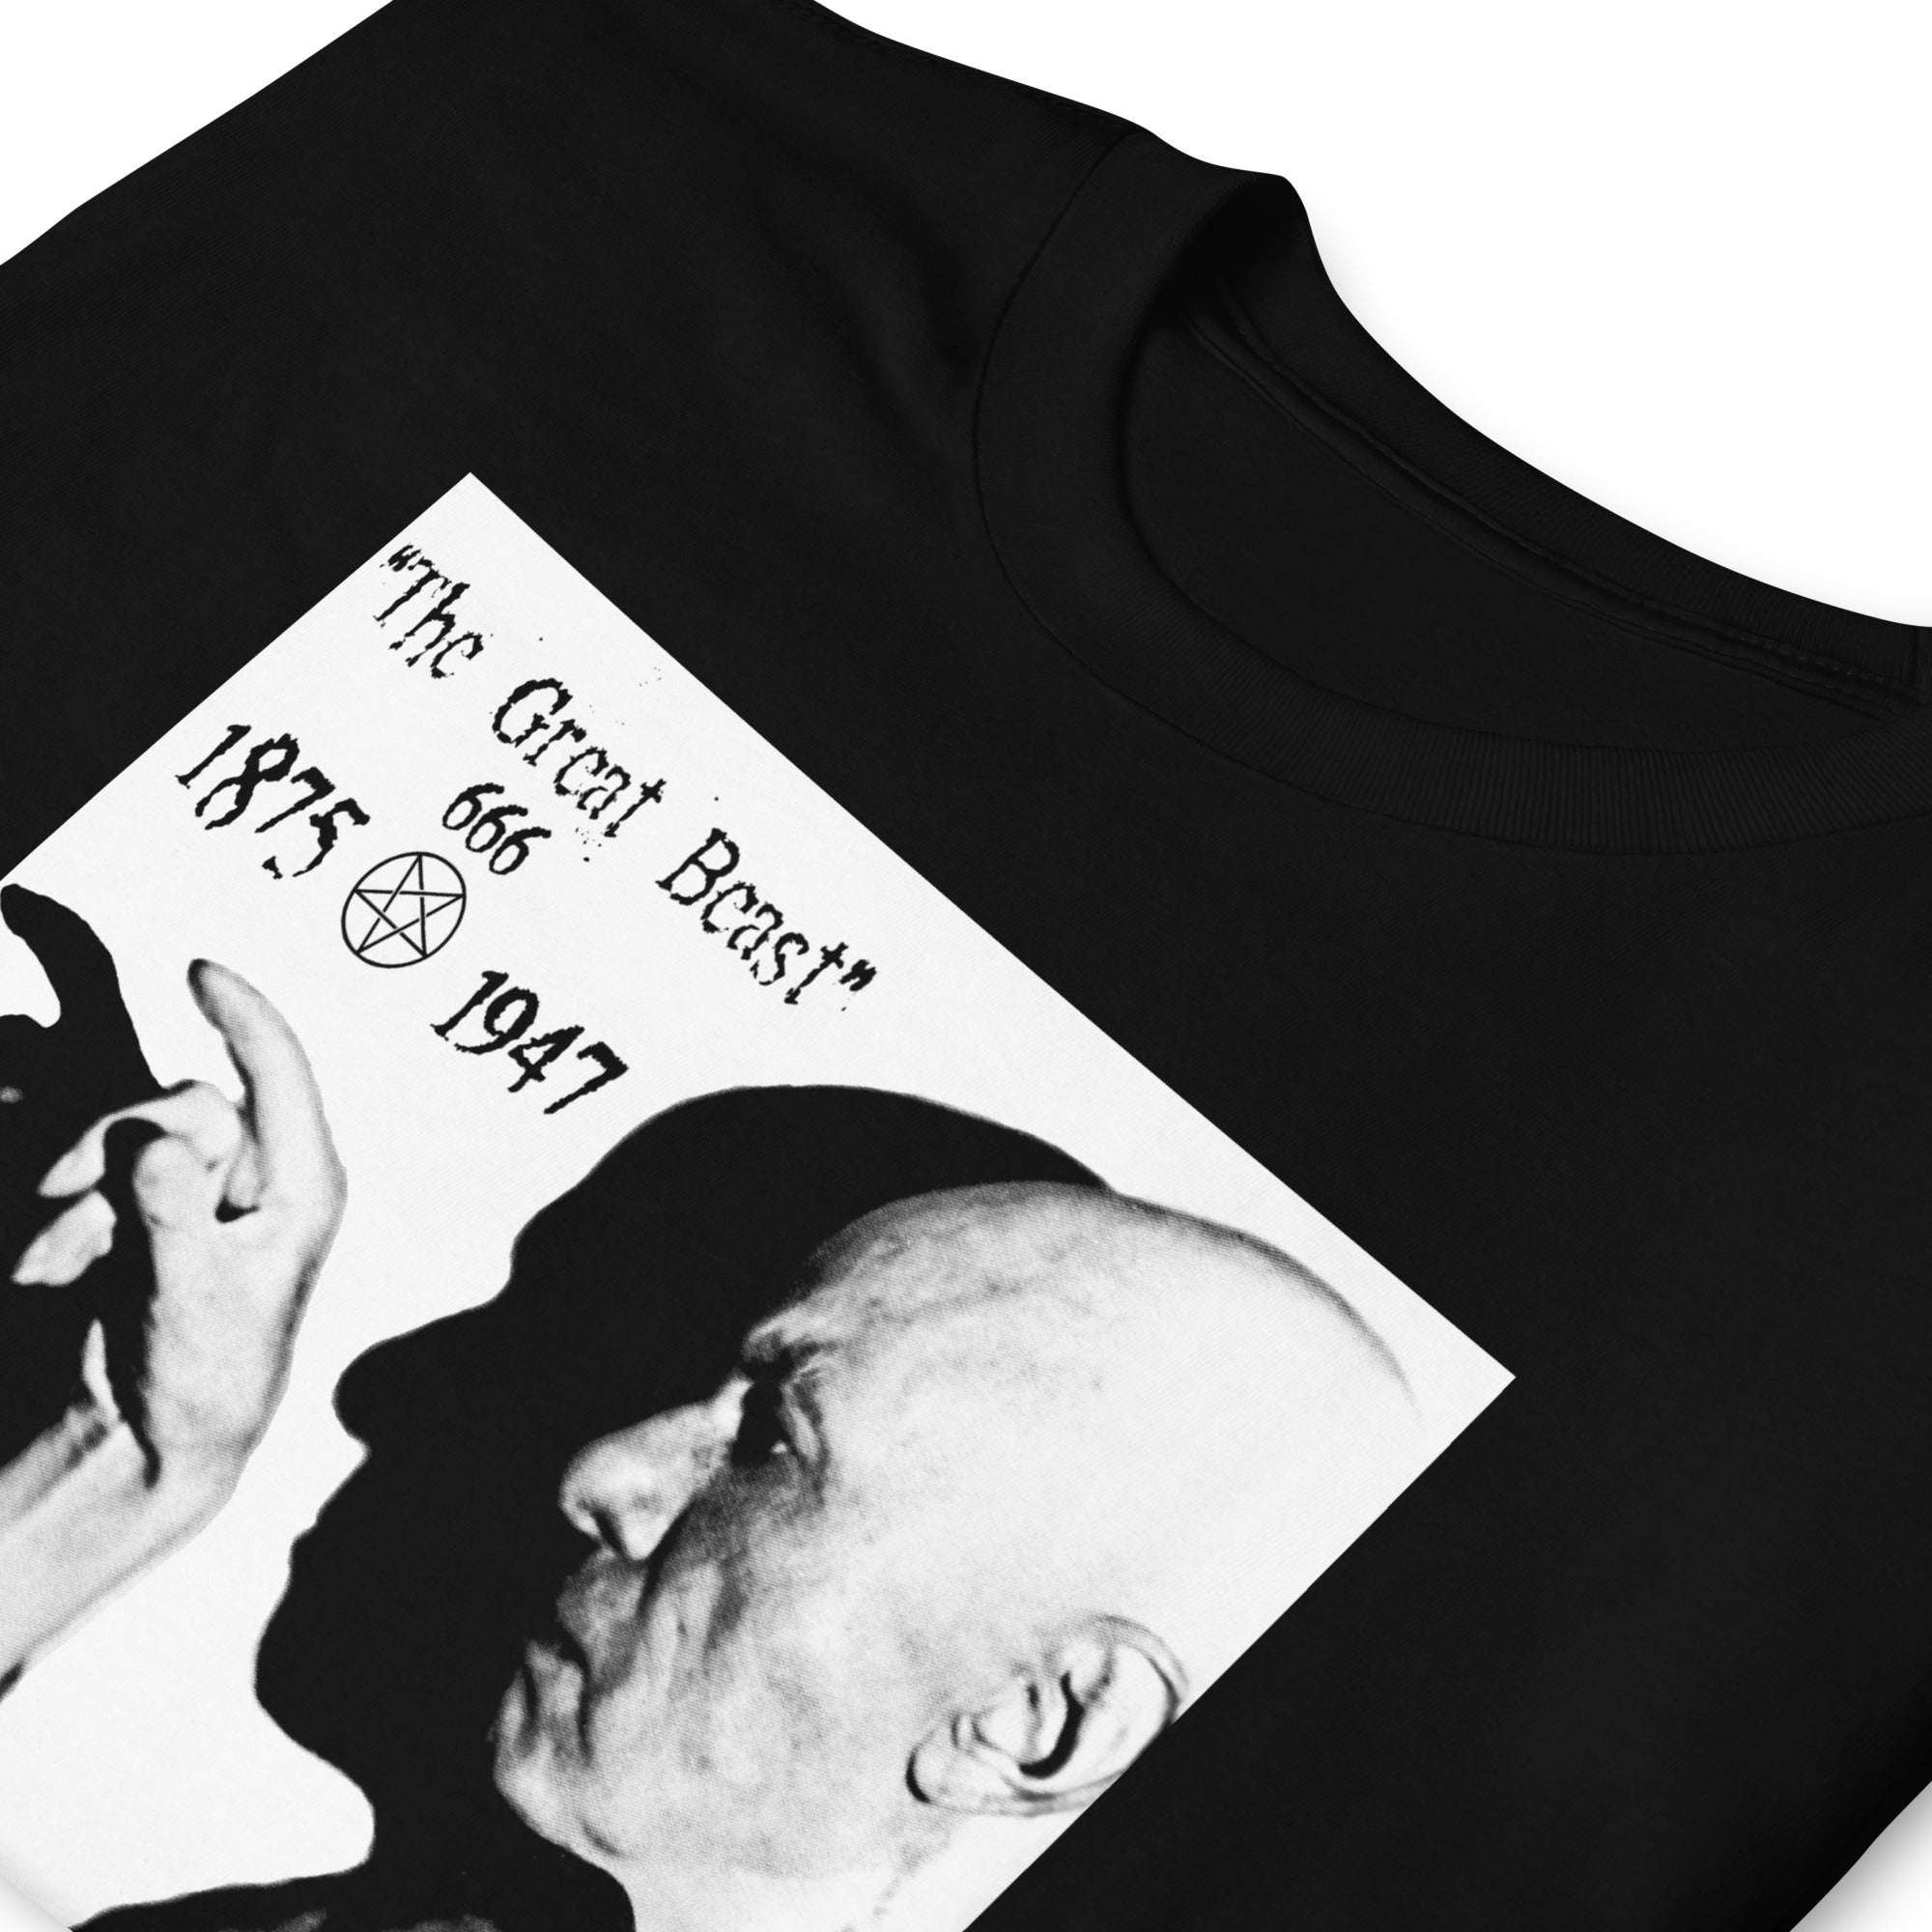 Aleister Crowley Infamous Occult Leader of Thelema Sex Magic Short Sleeve T-Shirt - Edge of Life Designs